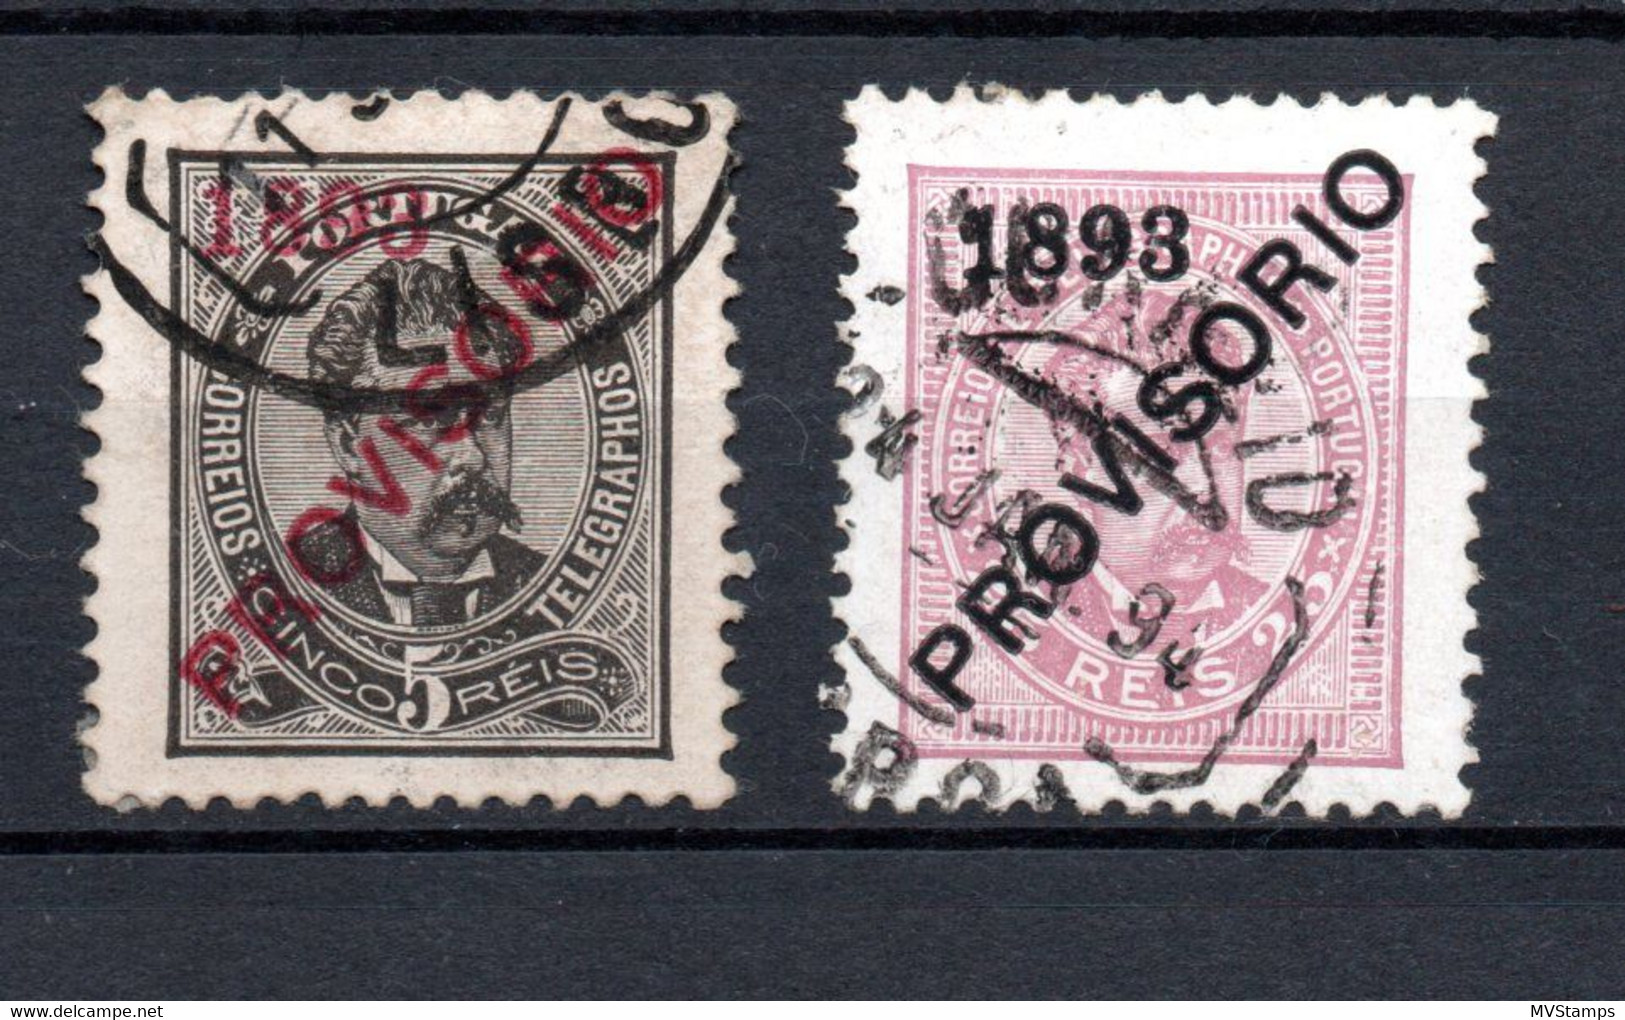 Portugal 18932 King Carlos/Provesorio  Stamps (Michel 87 And 90) Nice Used - Unused Stamps